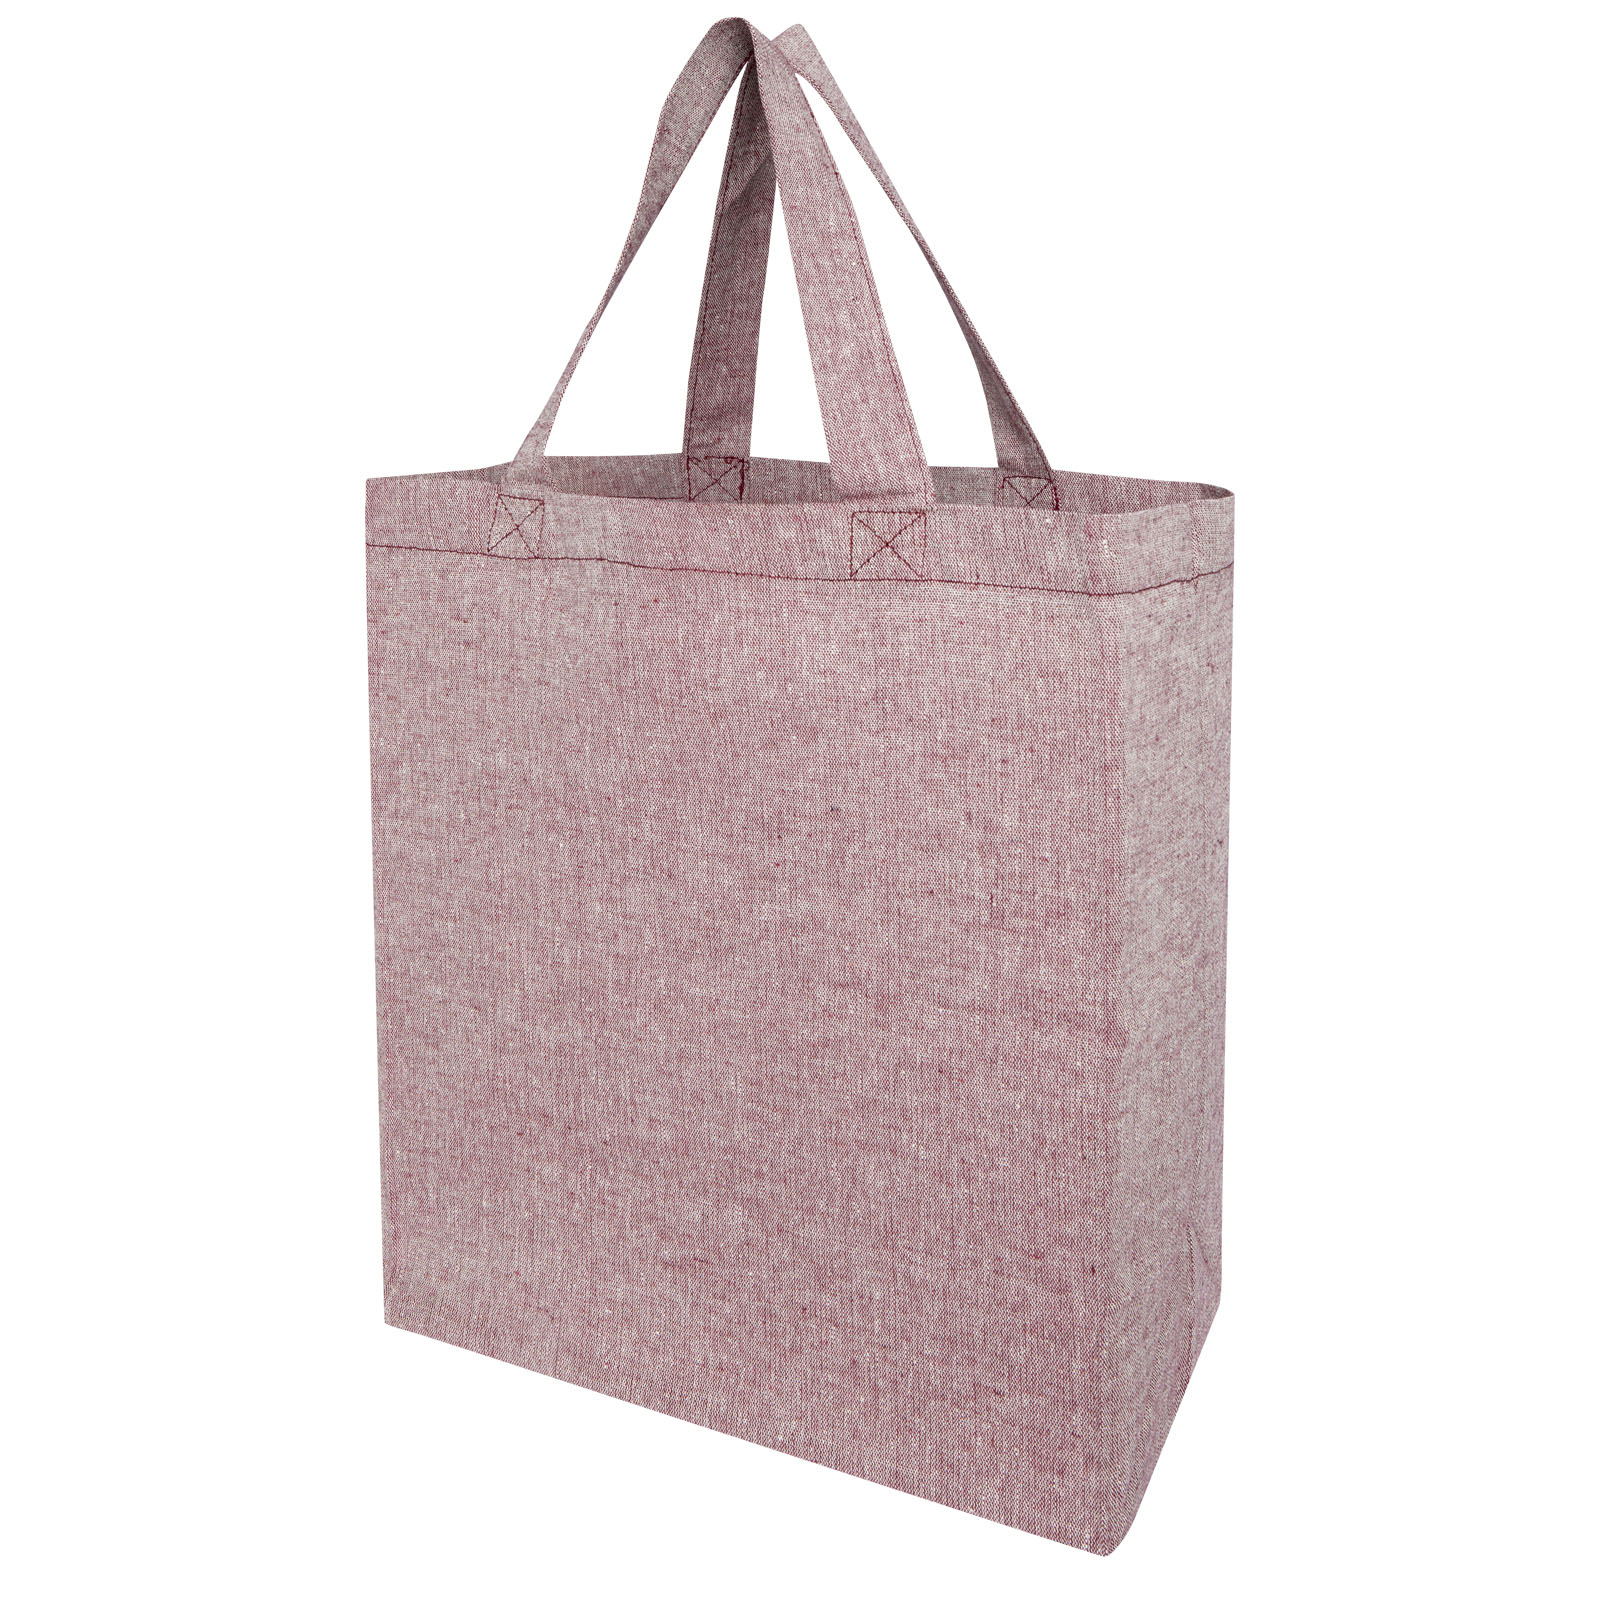 Bags - Pheebs 150 g/m² recycled gusset tote bag 13L